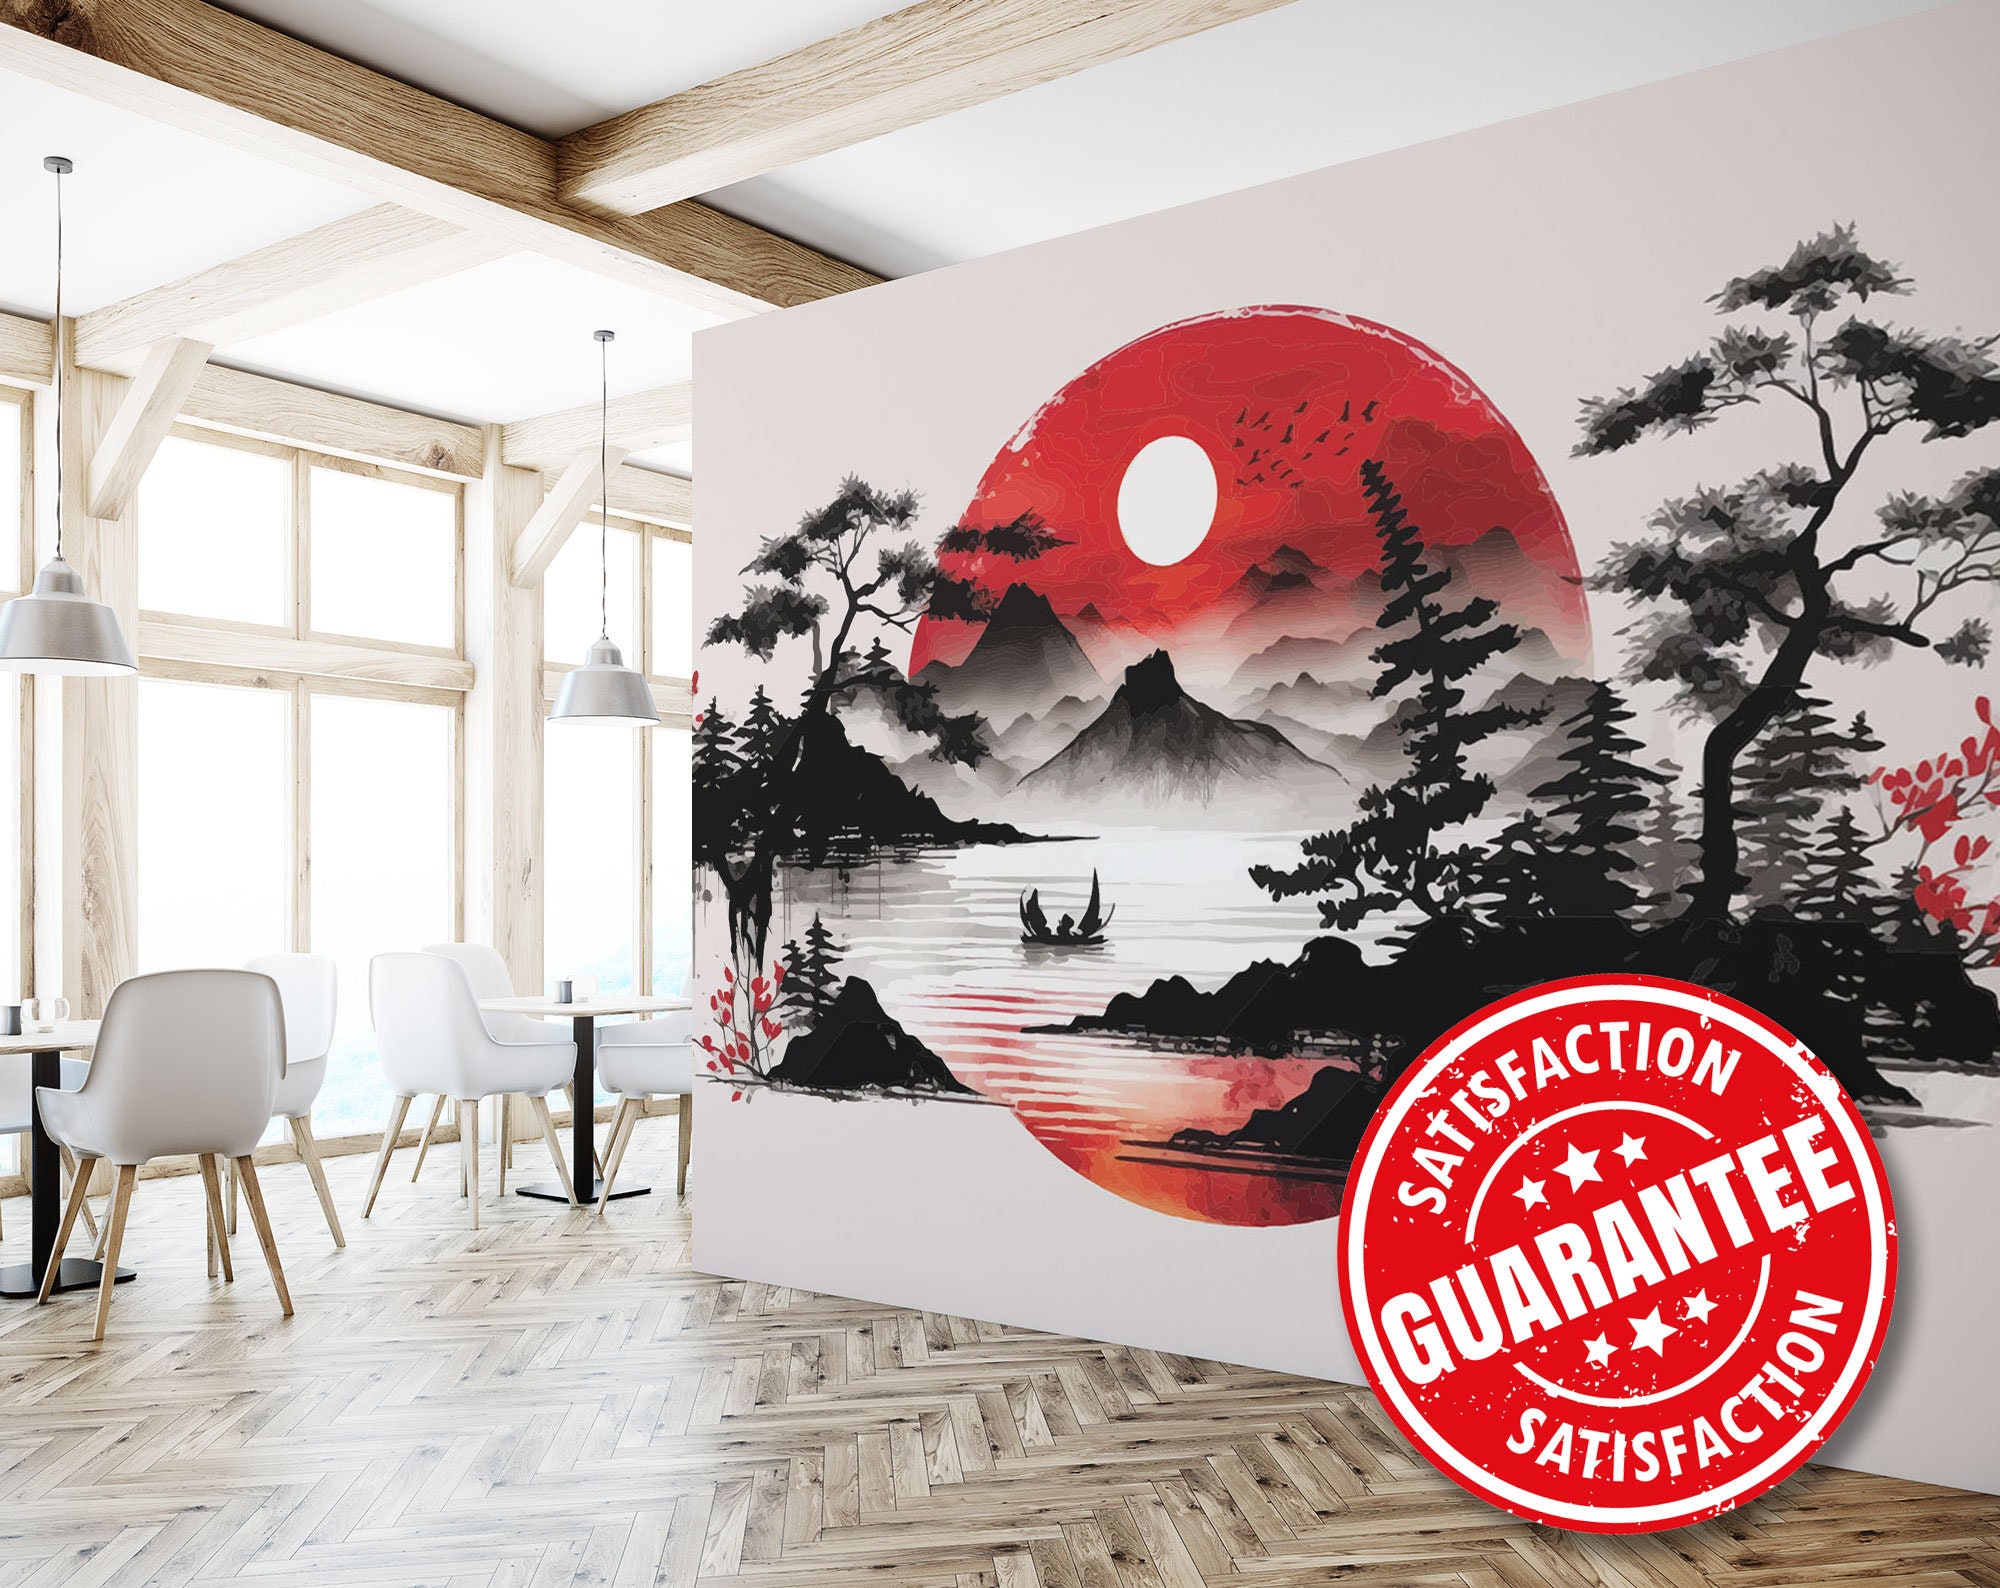 Japanese Dragon Wall Mural Wallpaper, Water Ukiyo-e Peel and Stick, Removable  Wall Art Poster, Self Adhesive Decor Made in the USA 